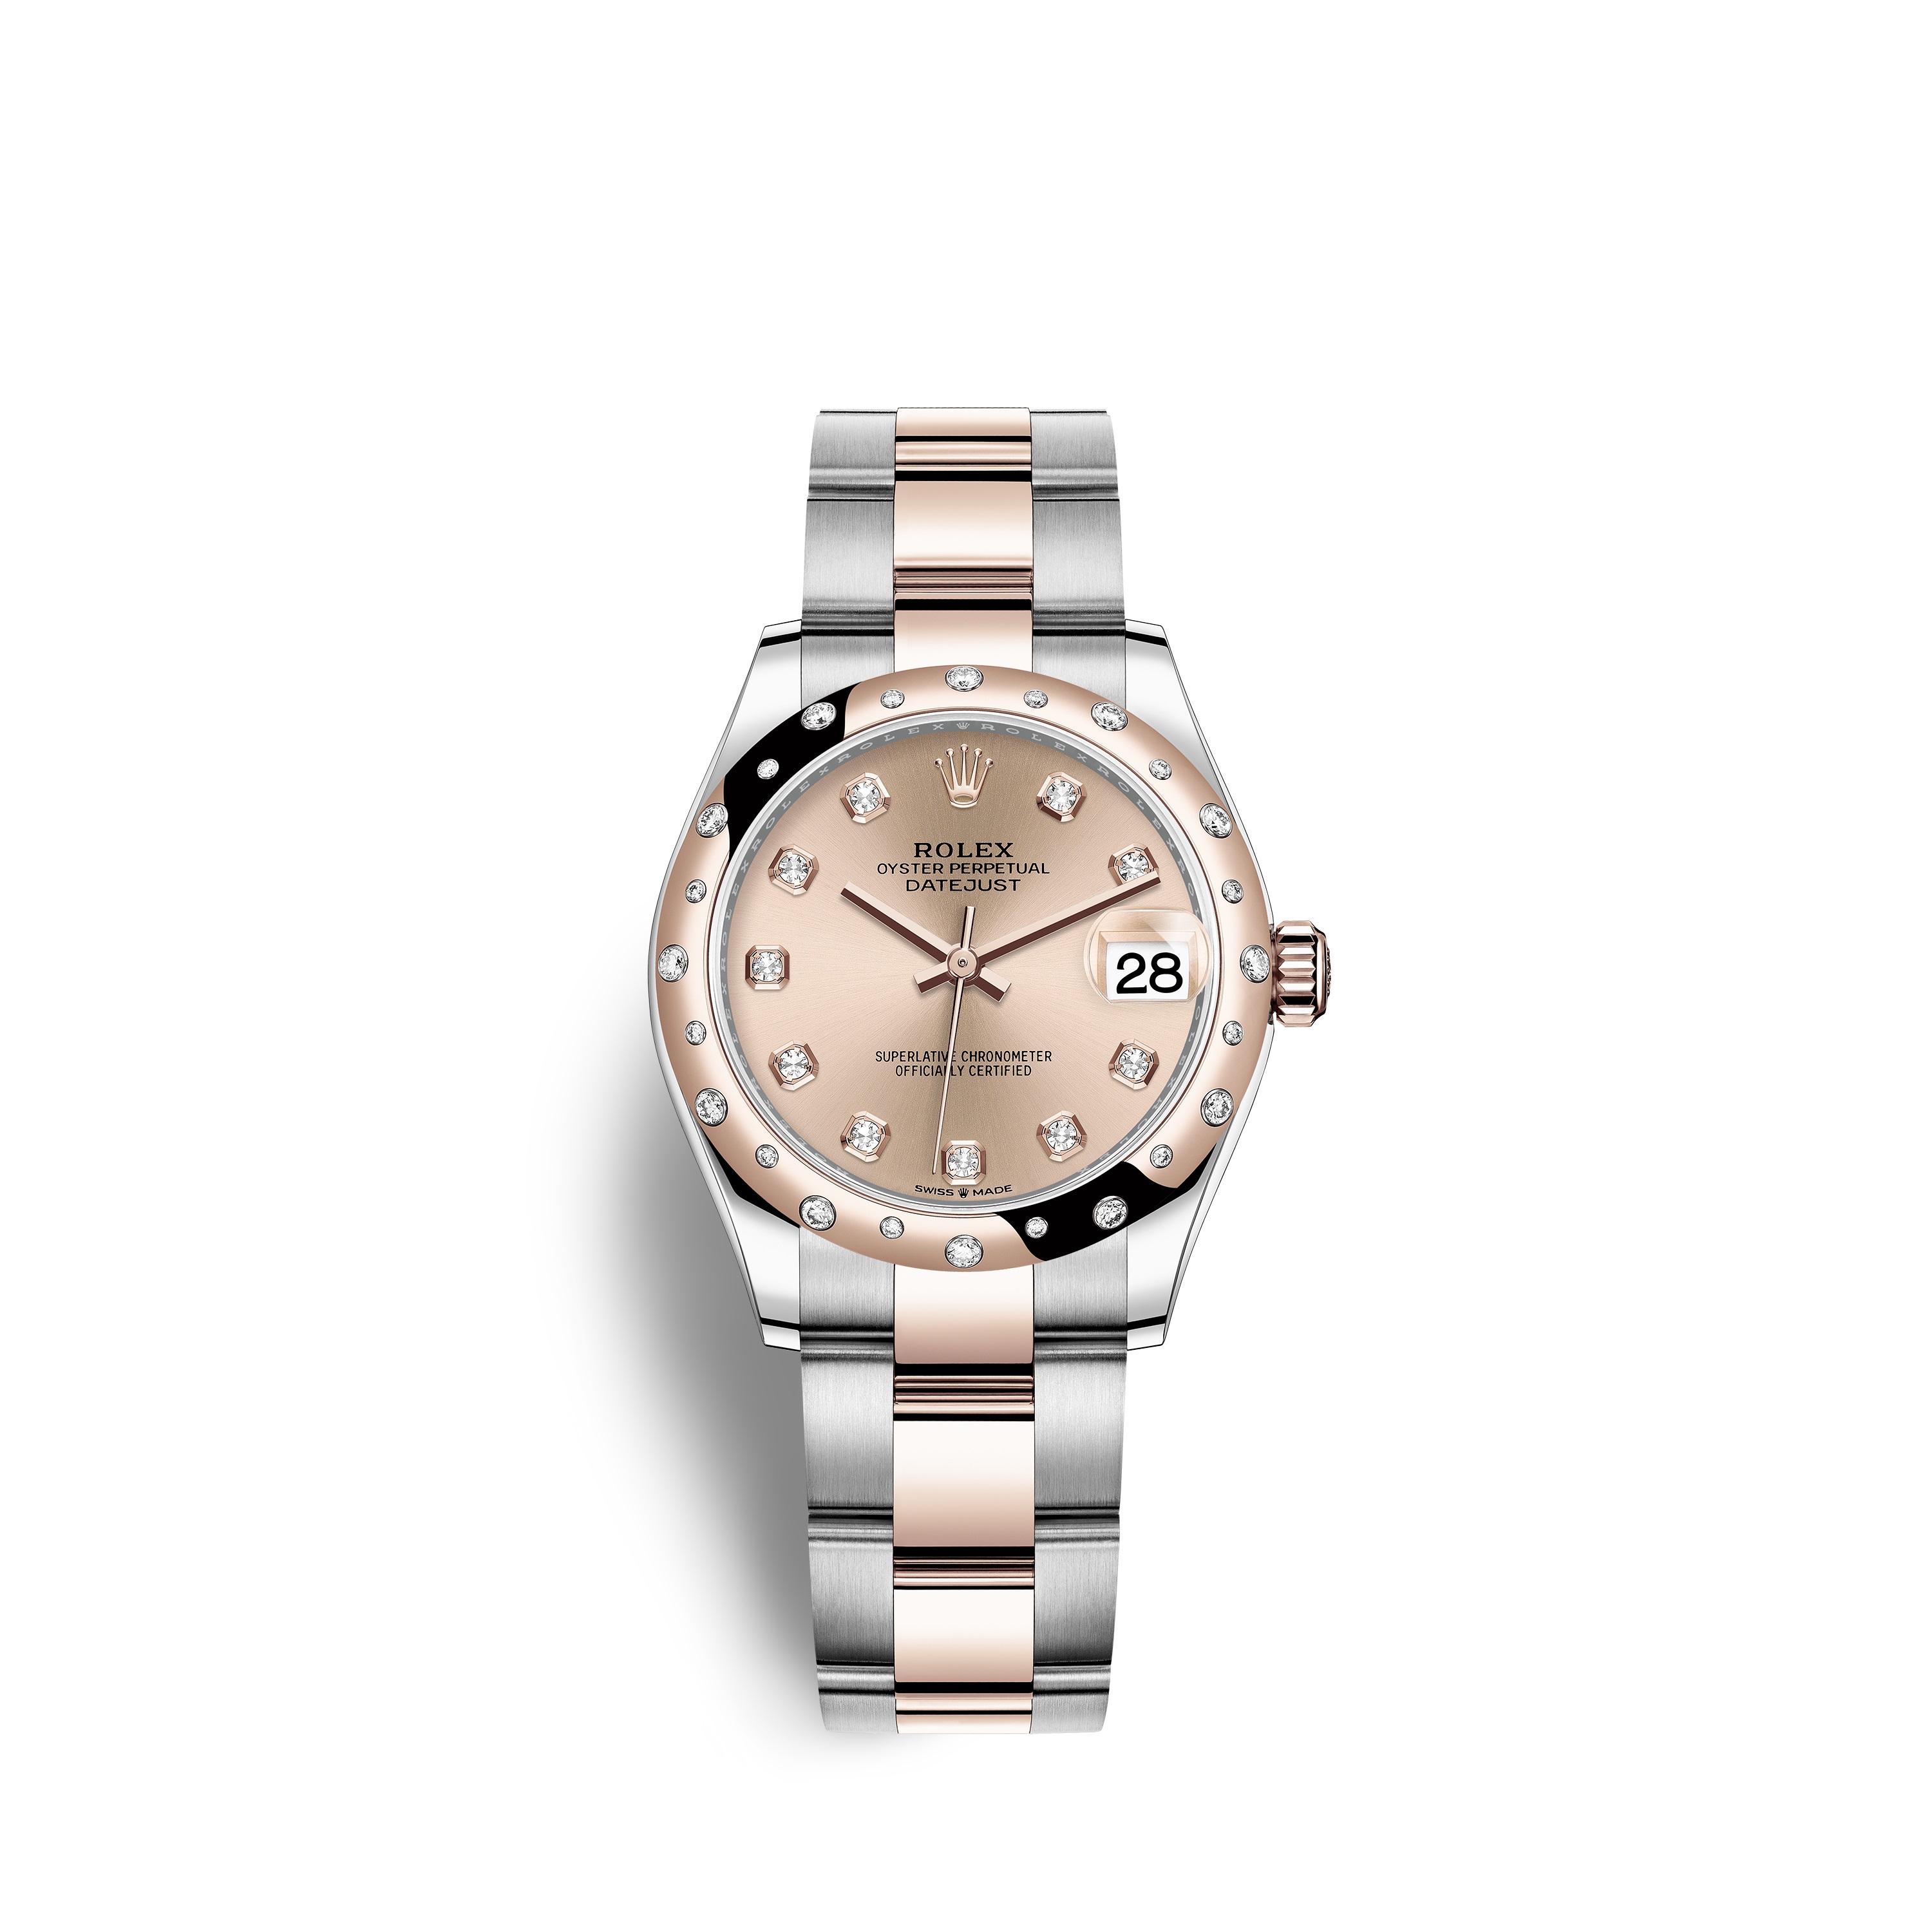 Datejust 31 278341RBR Rose Gold, Stainless Steel & Diamonds Watch (Rosé Colour Set with Diamonds)